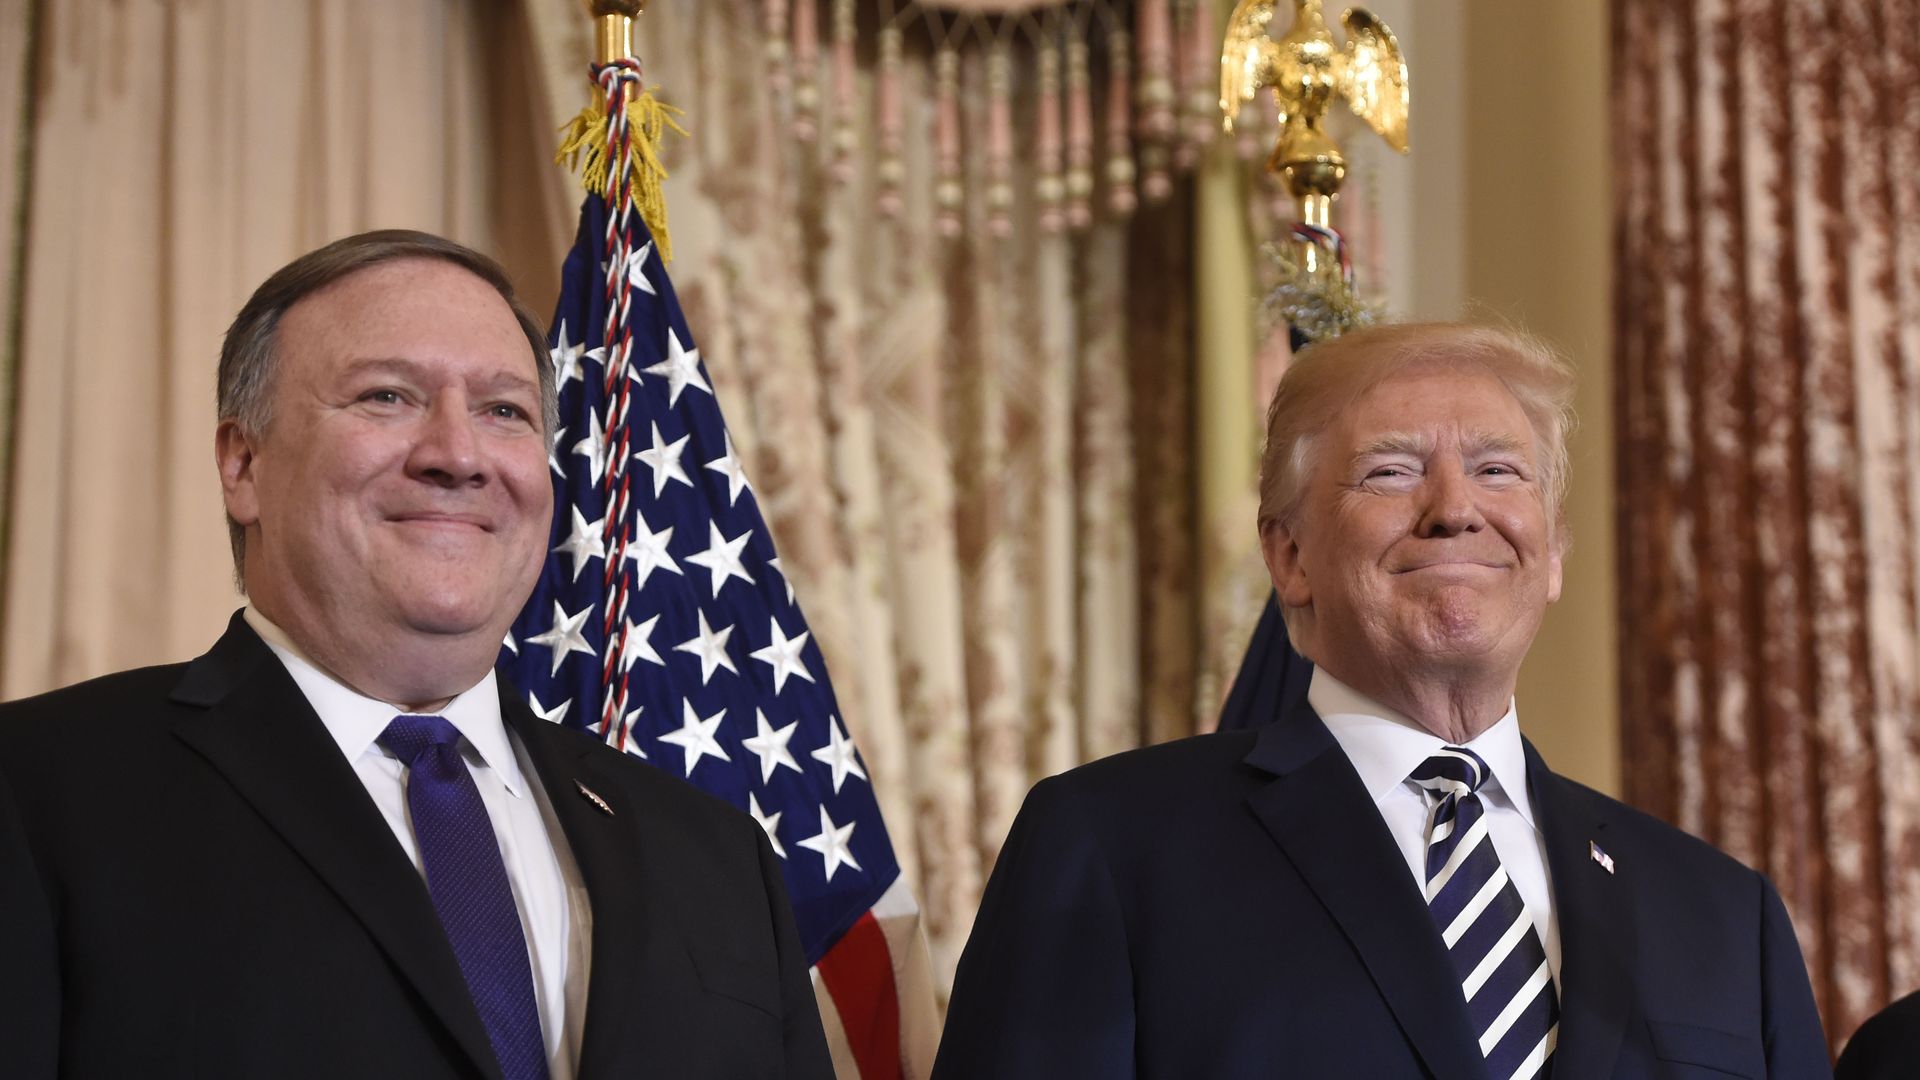 Mike Pompeo and Trump stand before an American flag.